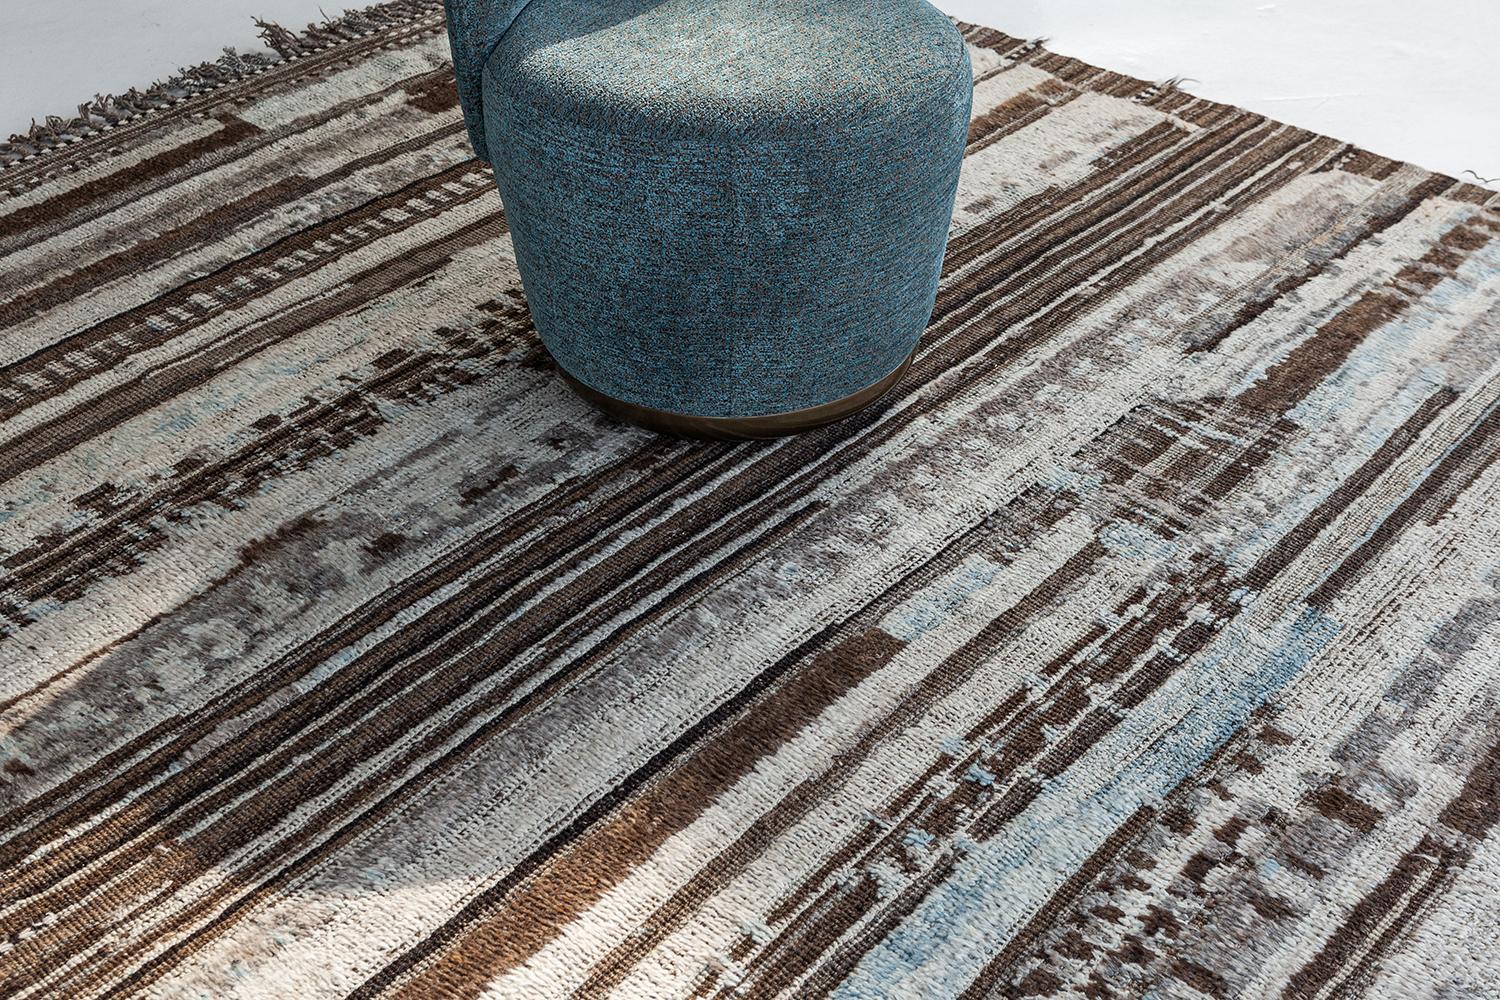 <pMalaren' is a luxurious wool rug with timeless embossed detailing. In addition to its perfect natural flat weave, Malaren has earthy tone shags that brings a lustrous texture and contemporary feel to one's space. With its plush pile, functional